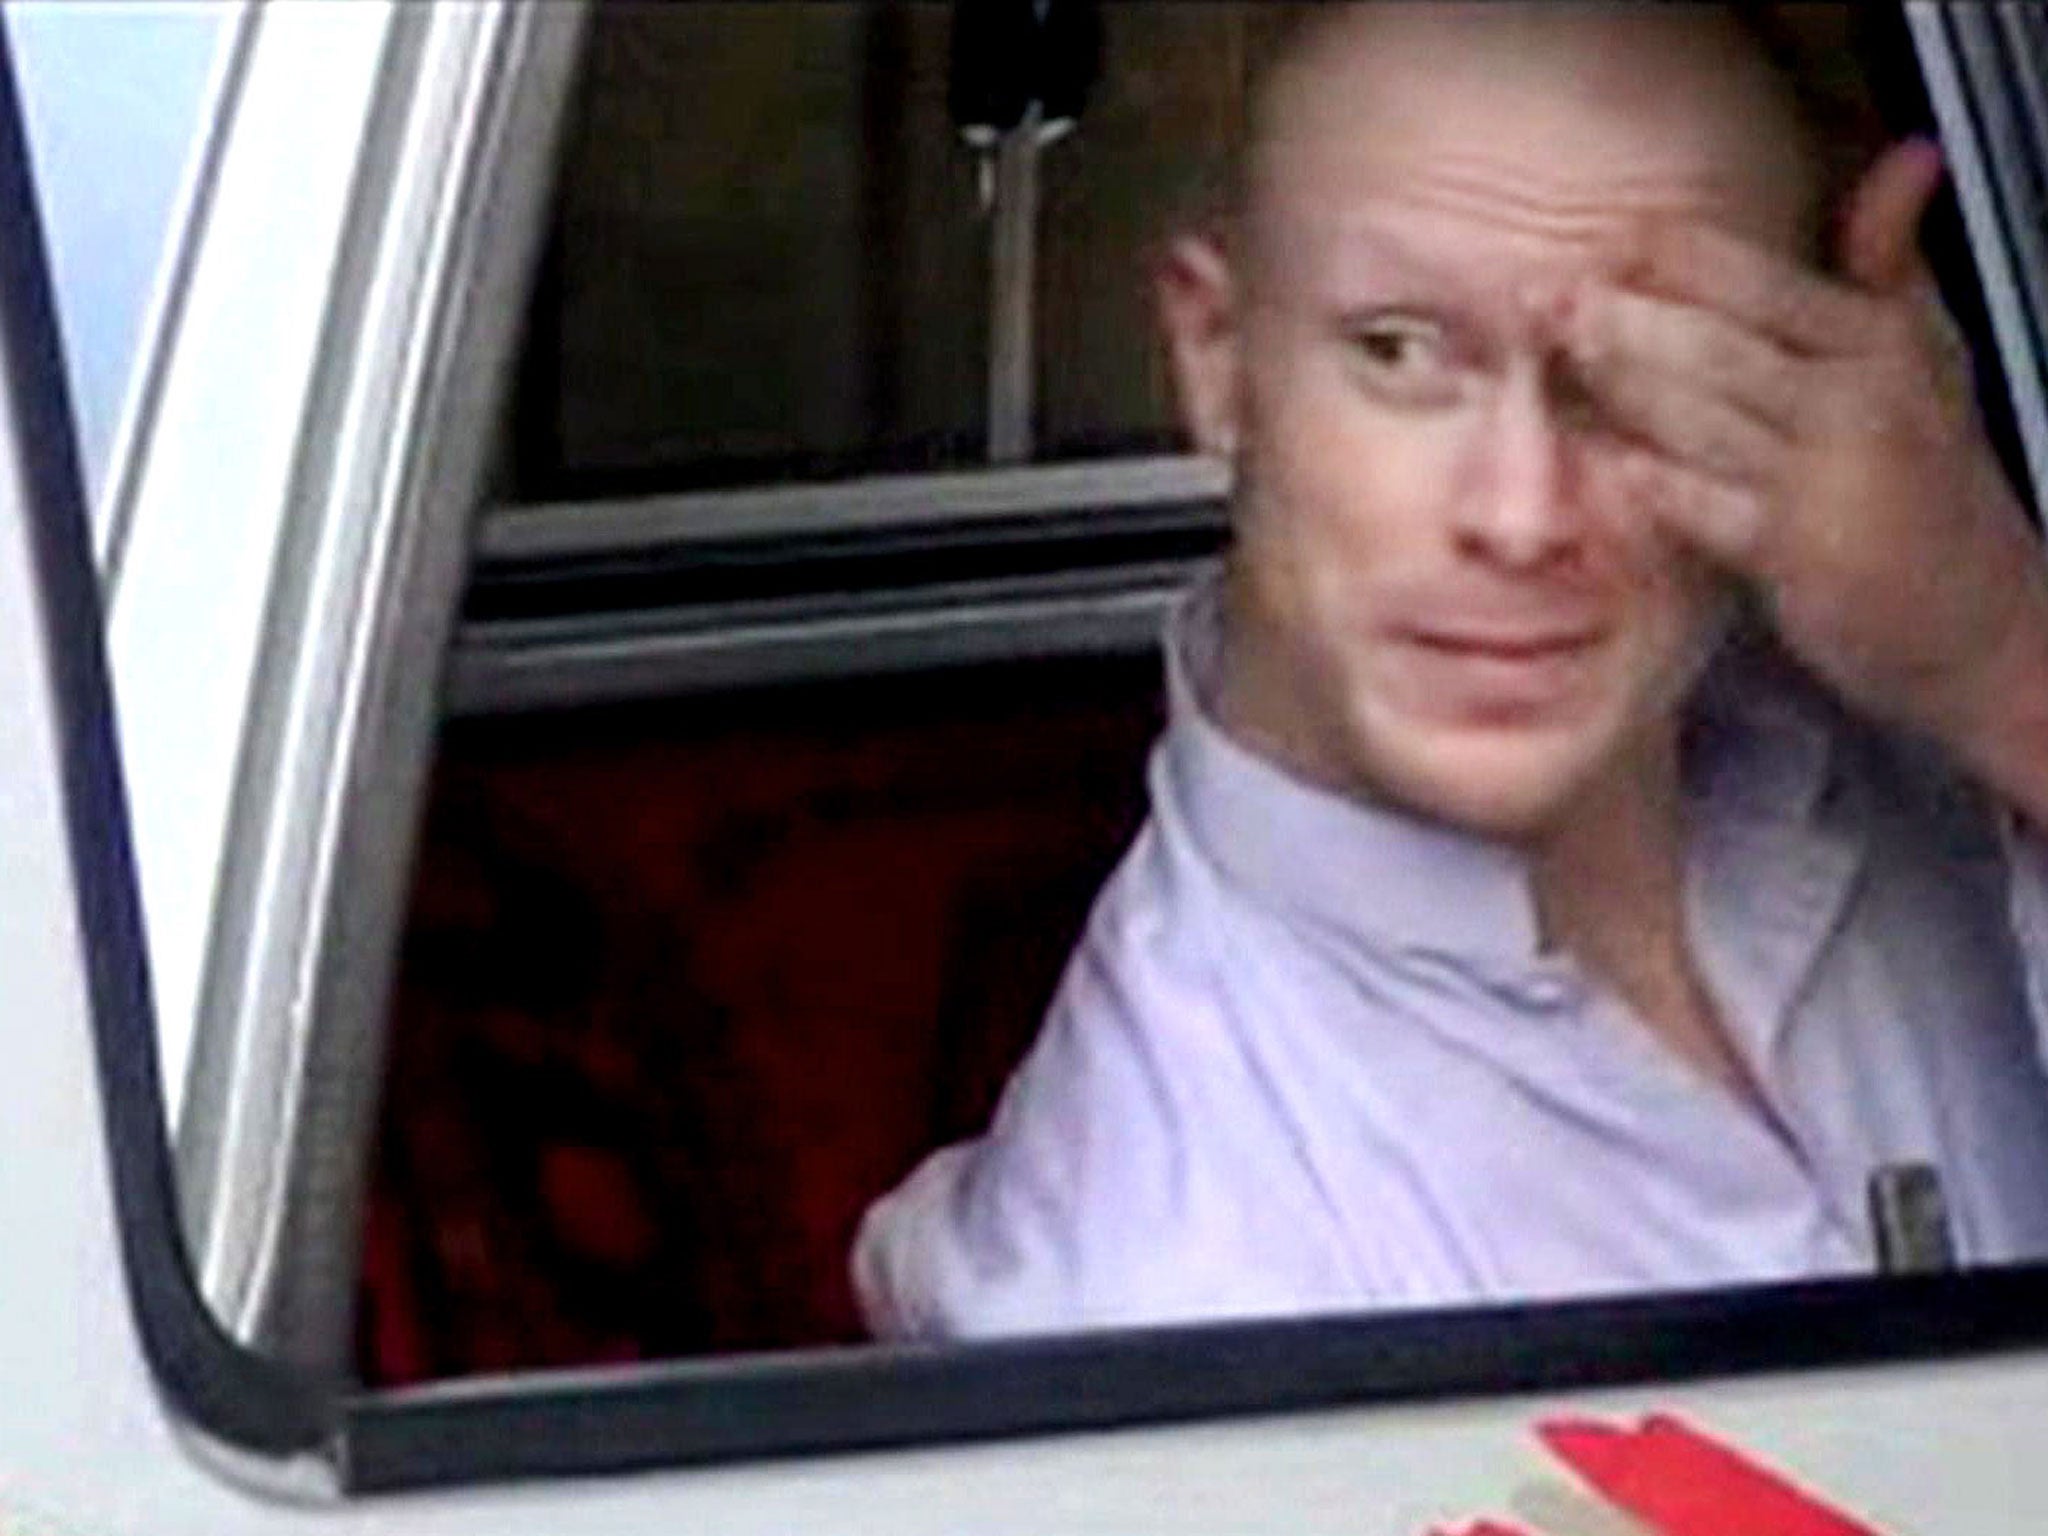 Sgt Bowe Bergdahl, sits in a vehicle guarded by the Taliban in eastern Afghanistan. Bergdahl was freed by the Taliban on 31 May, 2014, in exchange for five Afghan detainees held in the US prison at Guantanamo Bay, Cuba